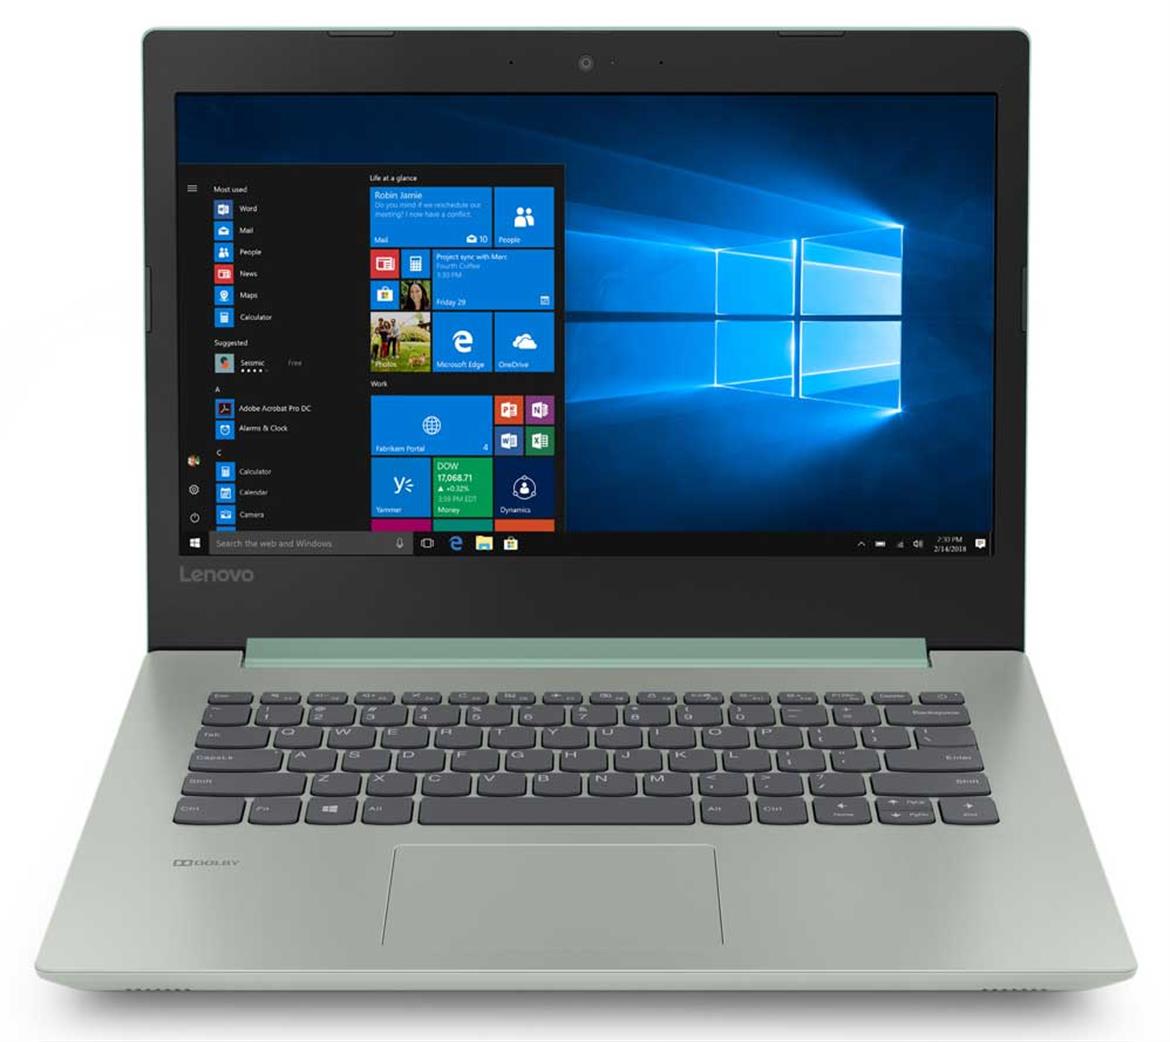 Lenovo IdeaPad 330, 330S, And 530S Laptops Arrive Promising Performance And Value Starting At $249